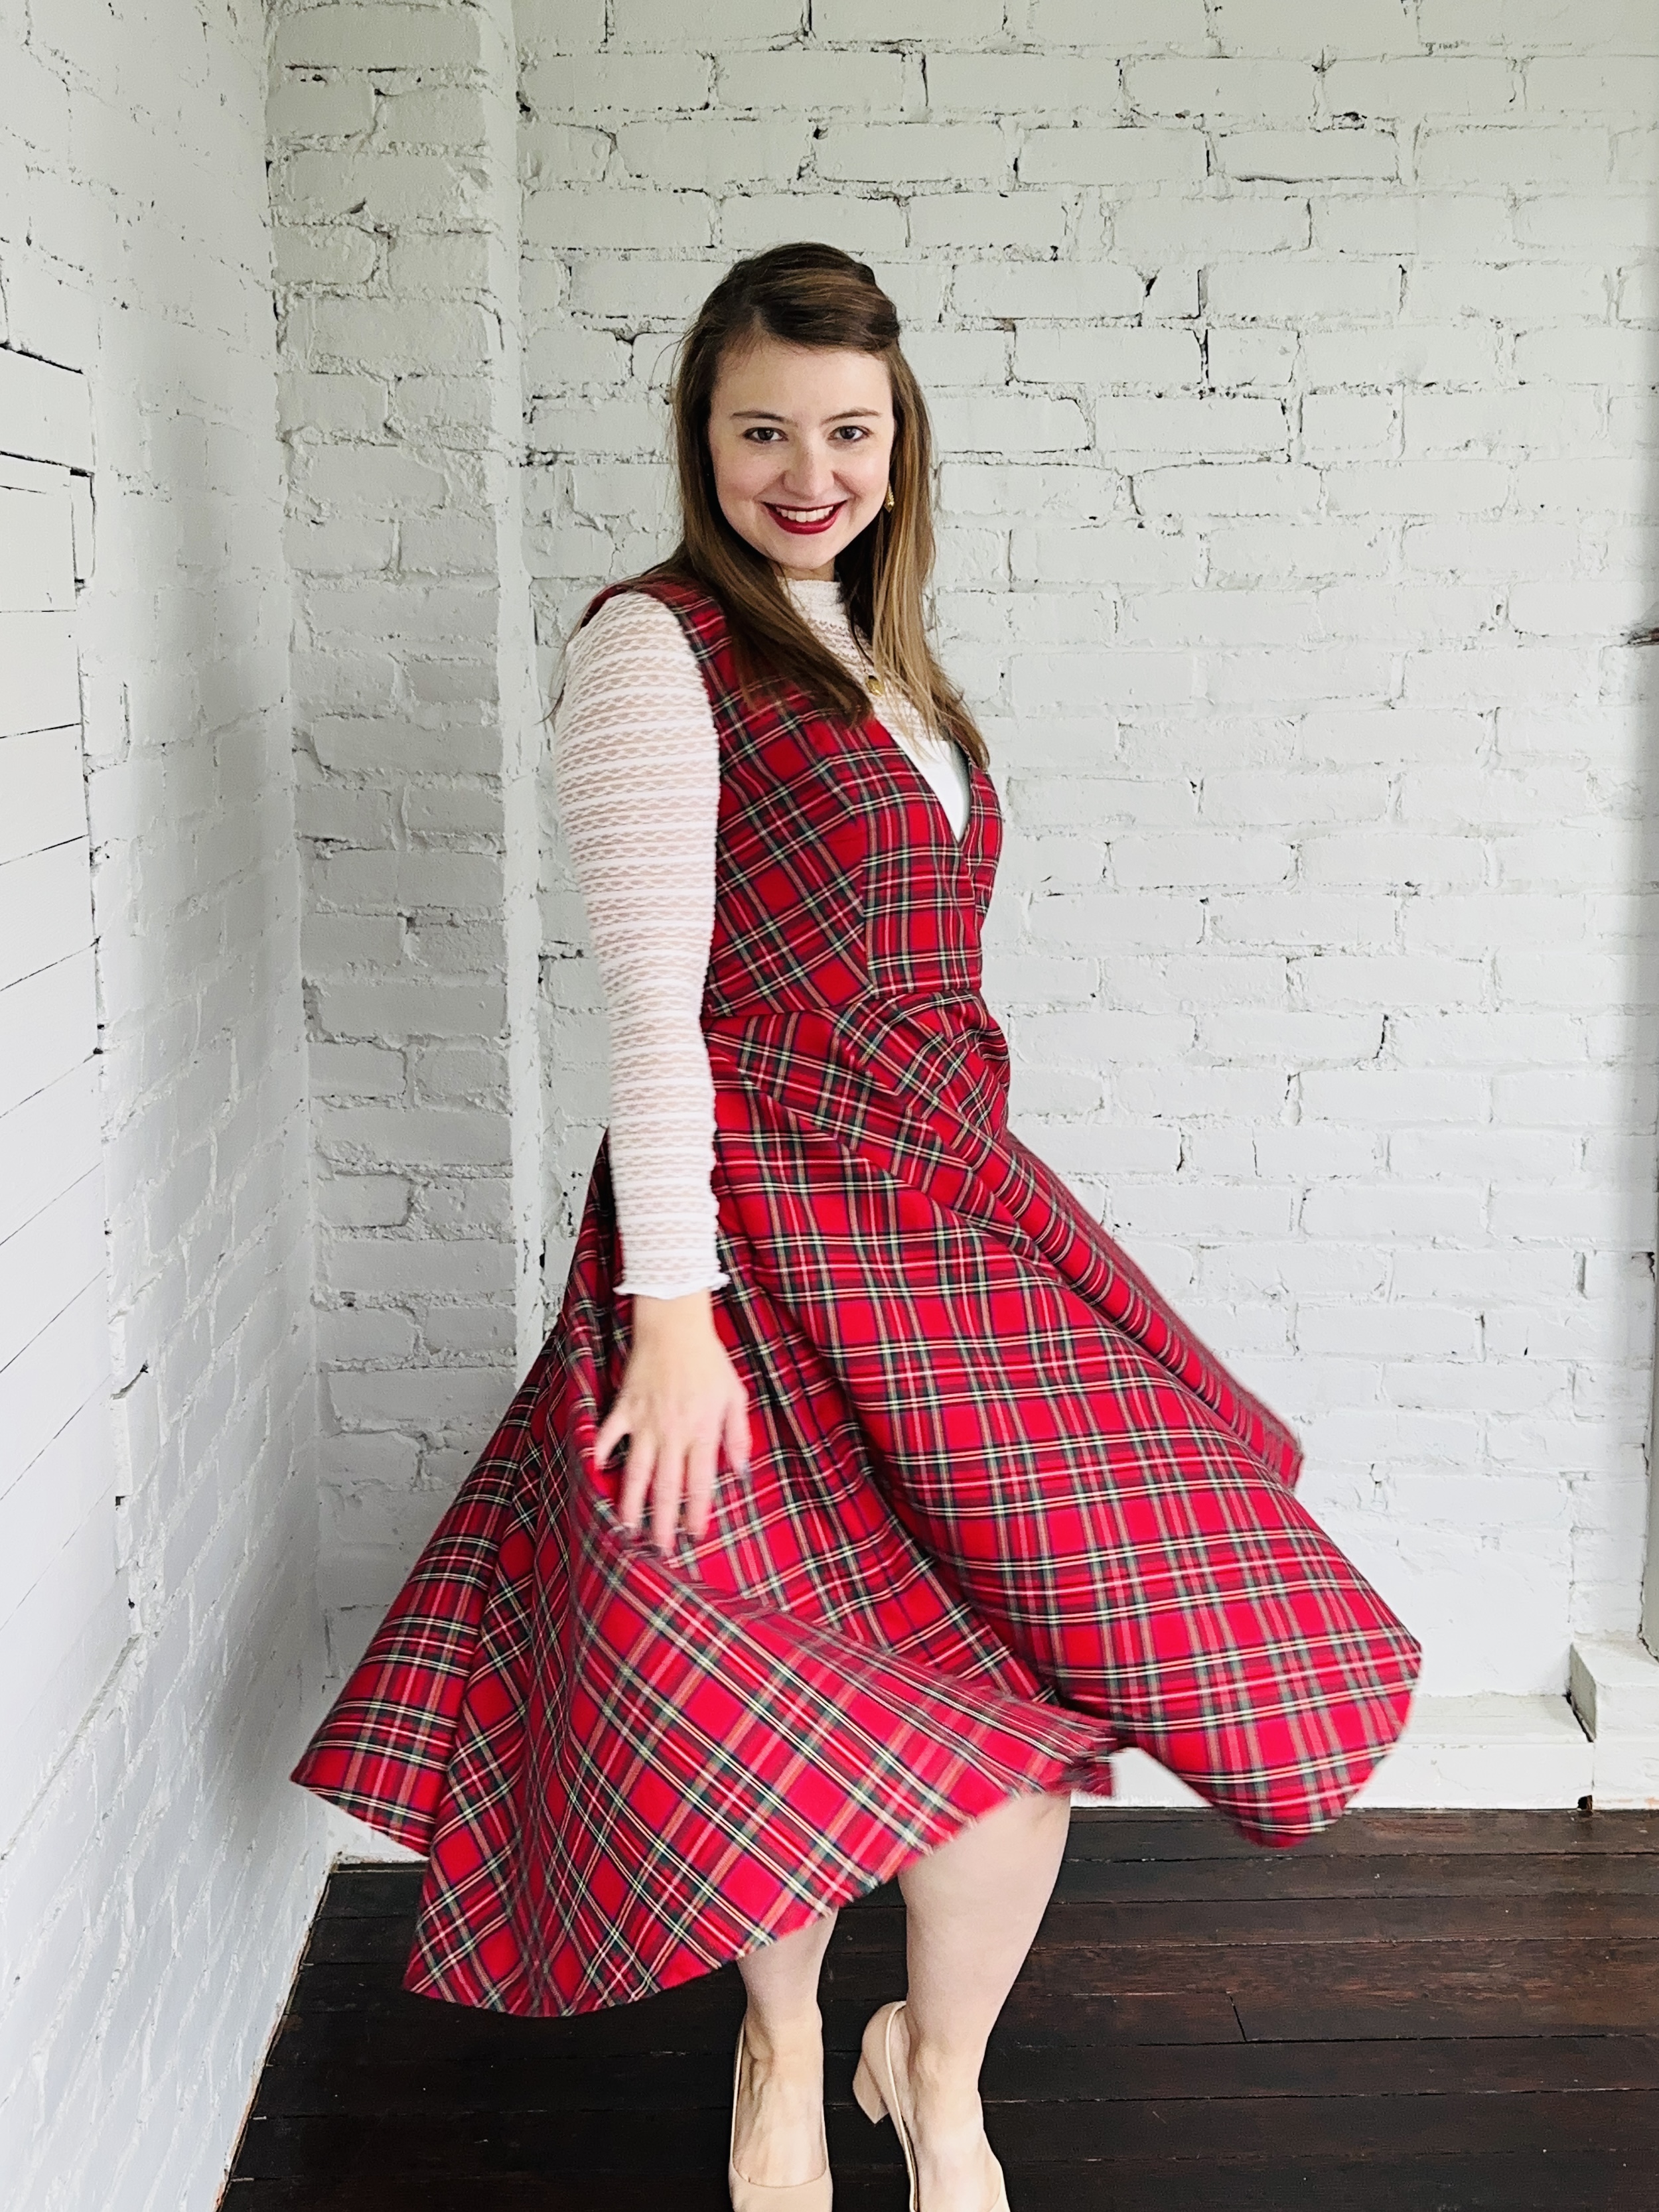 Made By A Fabricista: Vintage Inspired Holiday Outfit